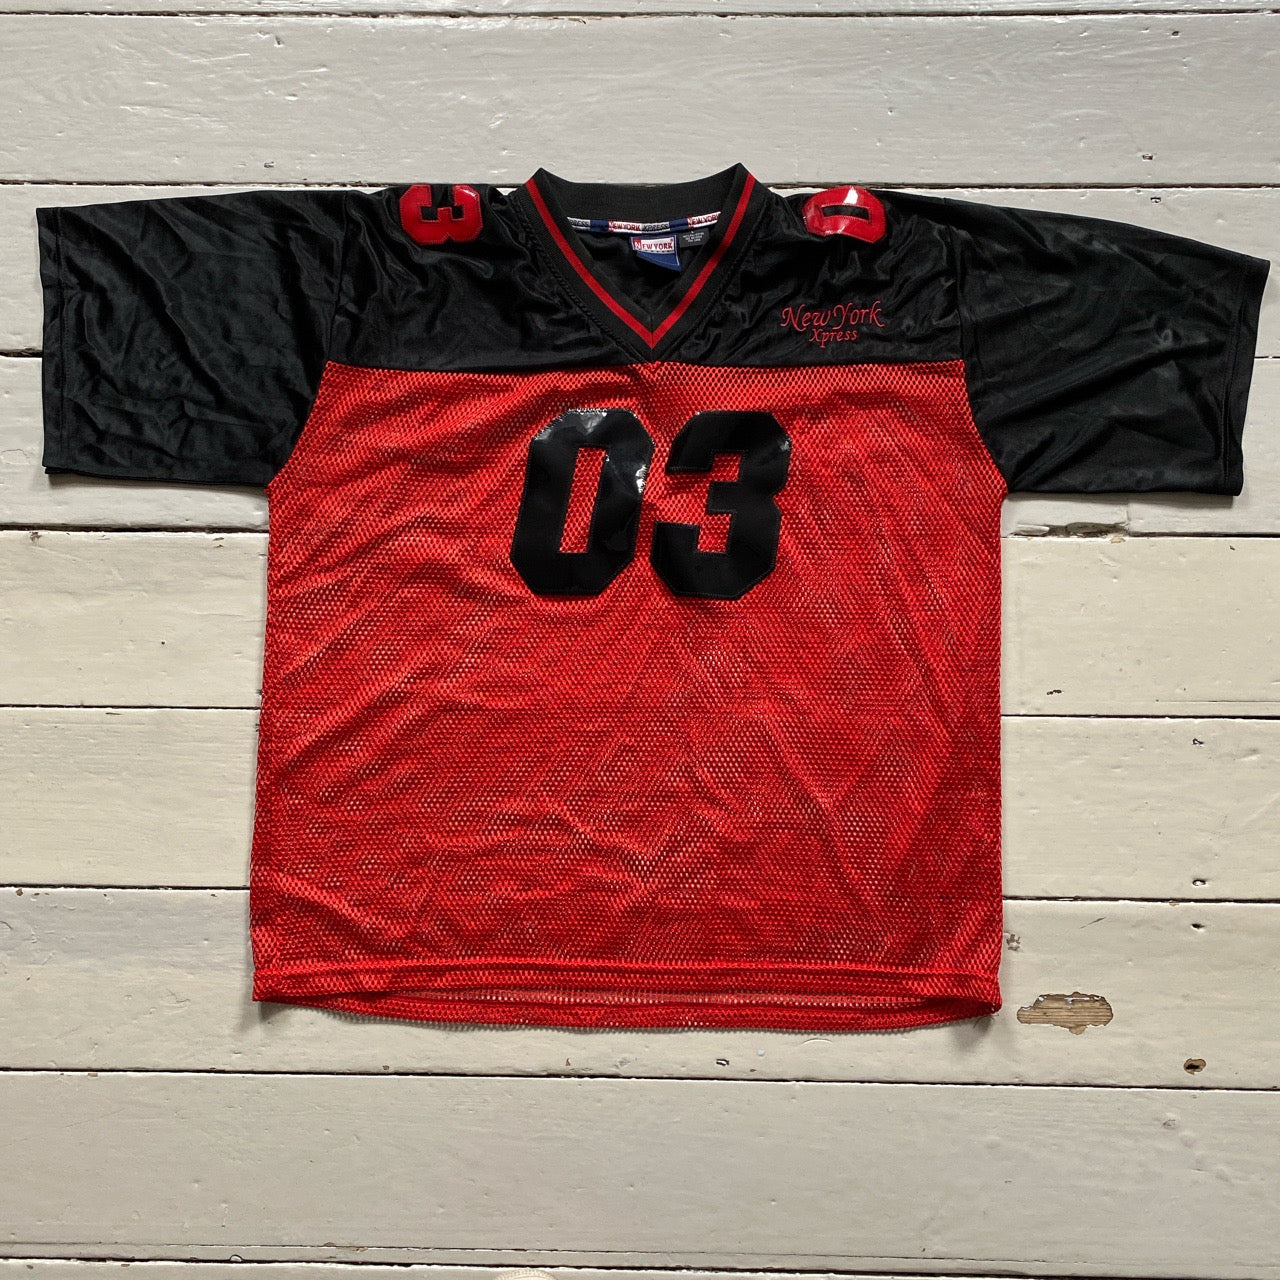 New York Express Indoor Football Vintage Jersey (Large)